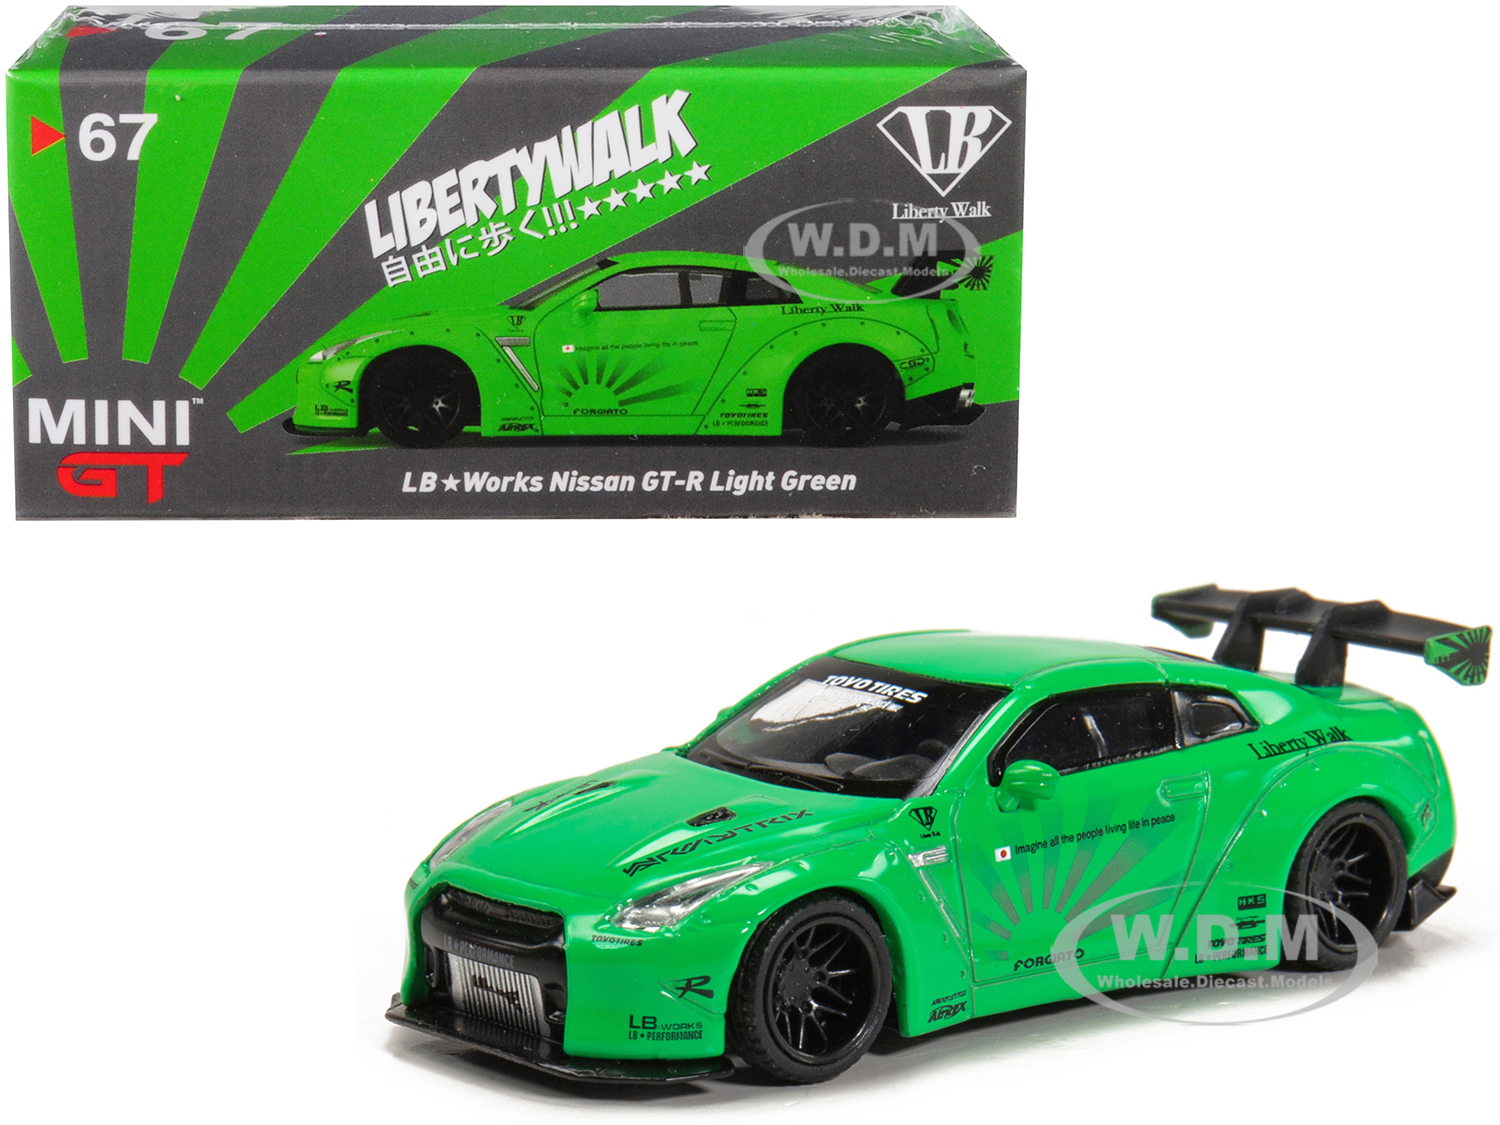 Nissan Gt-r (r35) Type 1 Lb Works "libertywalk" Light Green With Rear Wing "hobbiestock Exclusive" 1/64 Diecast Model Car By True Scale Miniatures